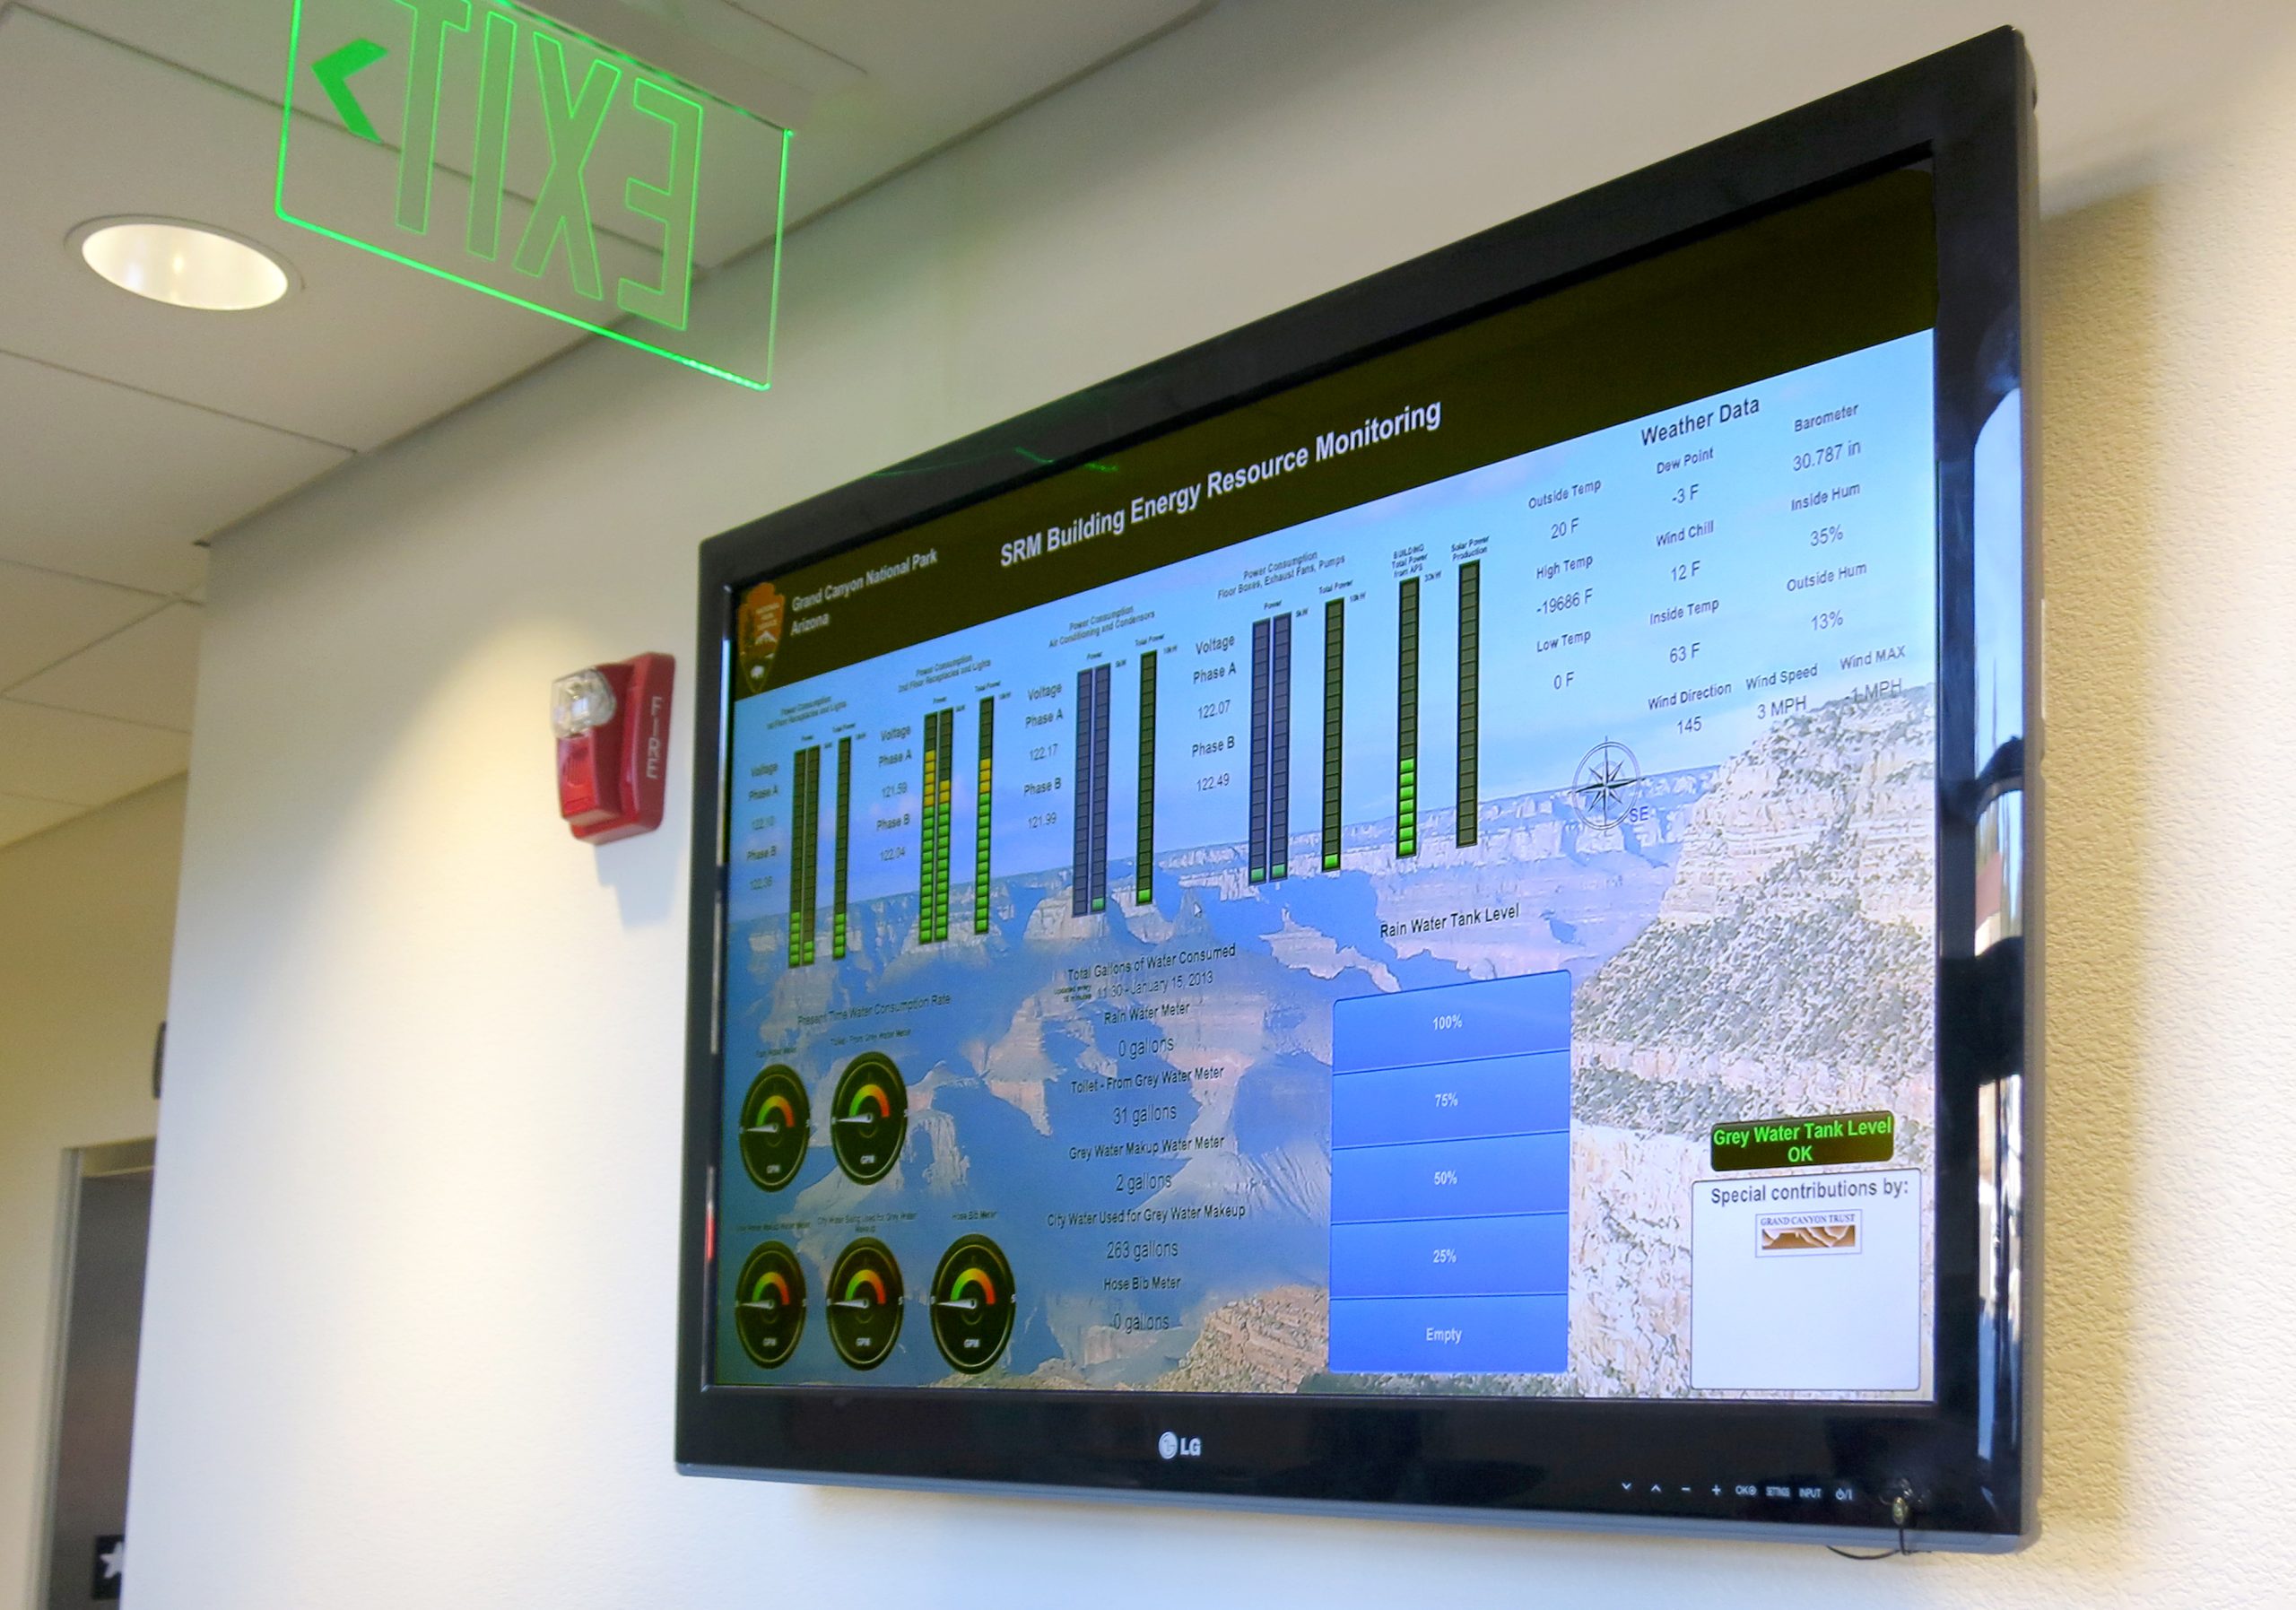 TV on an office wall showing real-time SRM building energy resource monitoring through bar charts and other graphics.